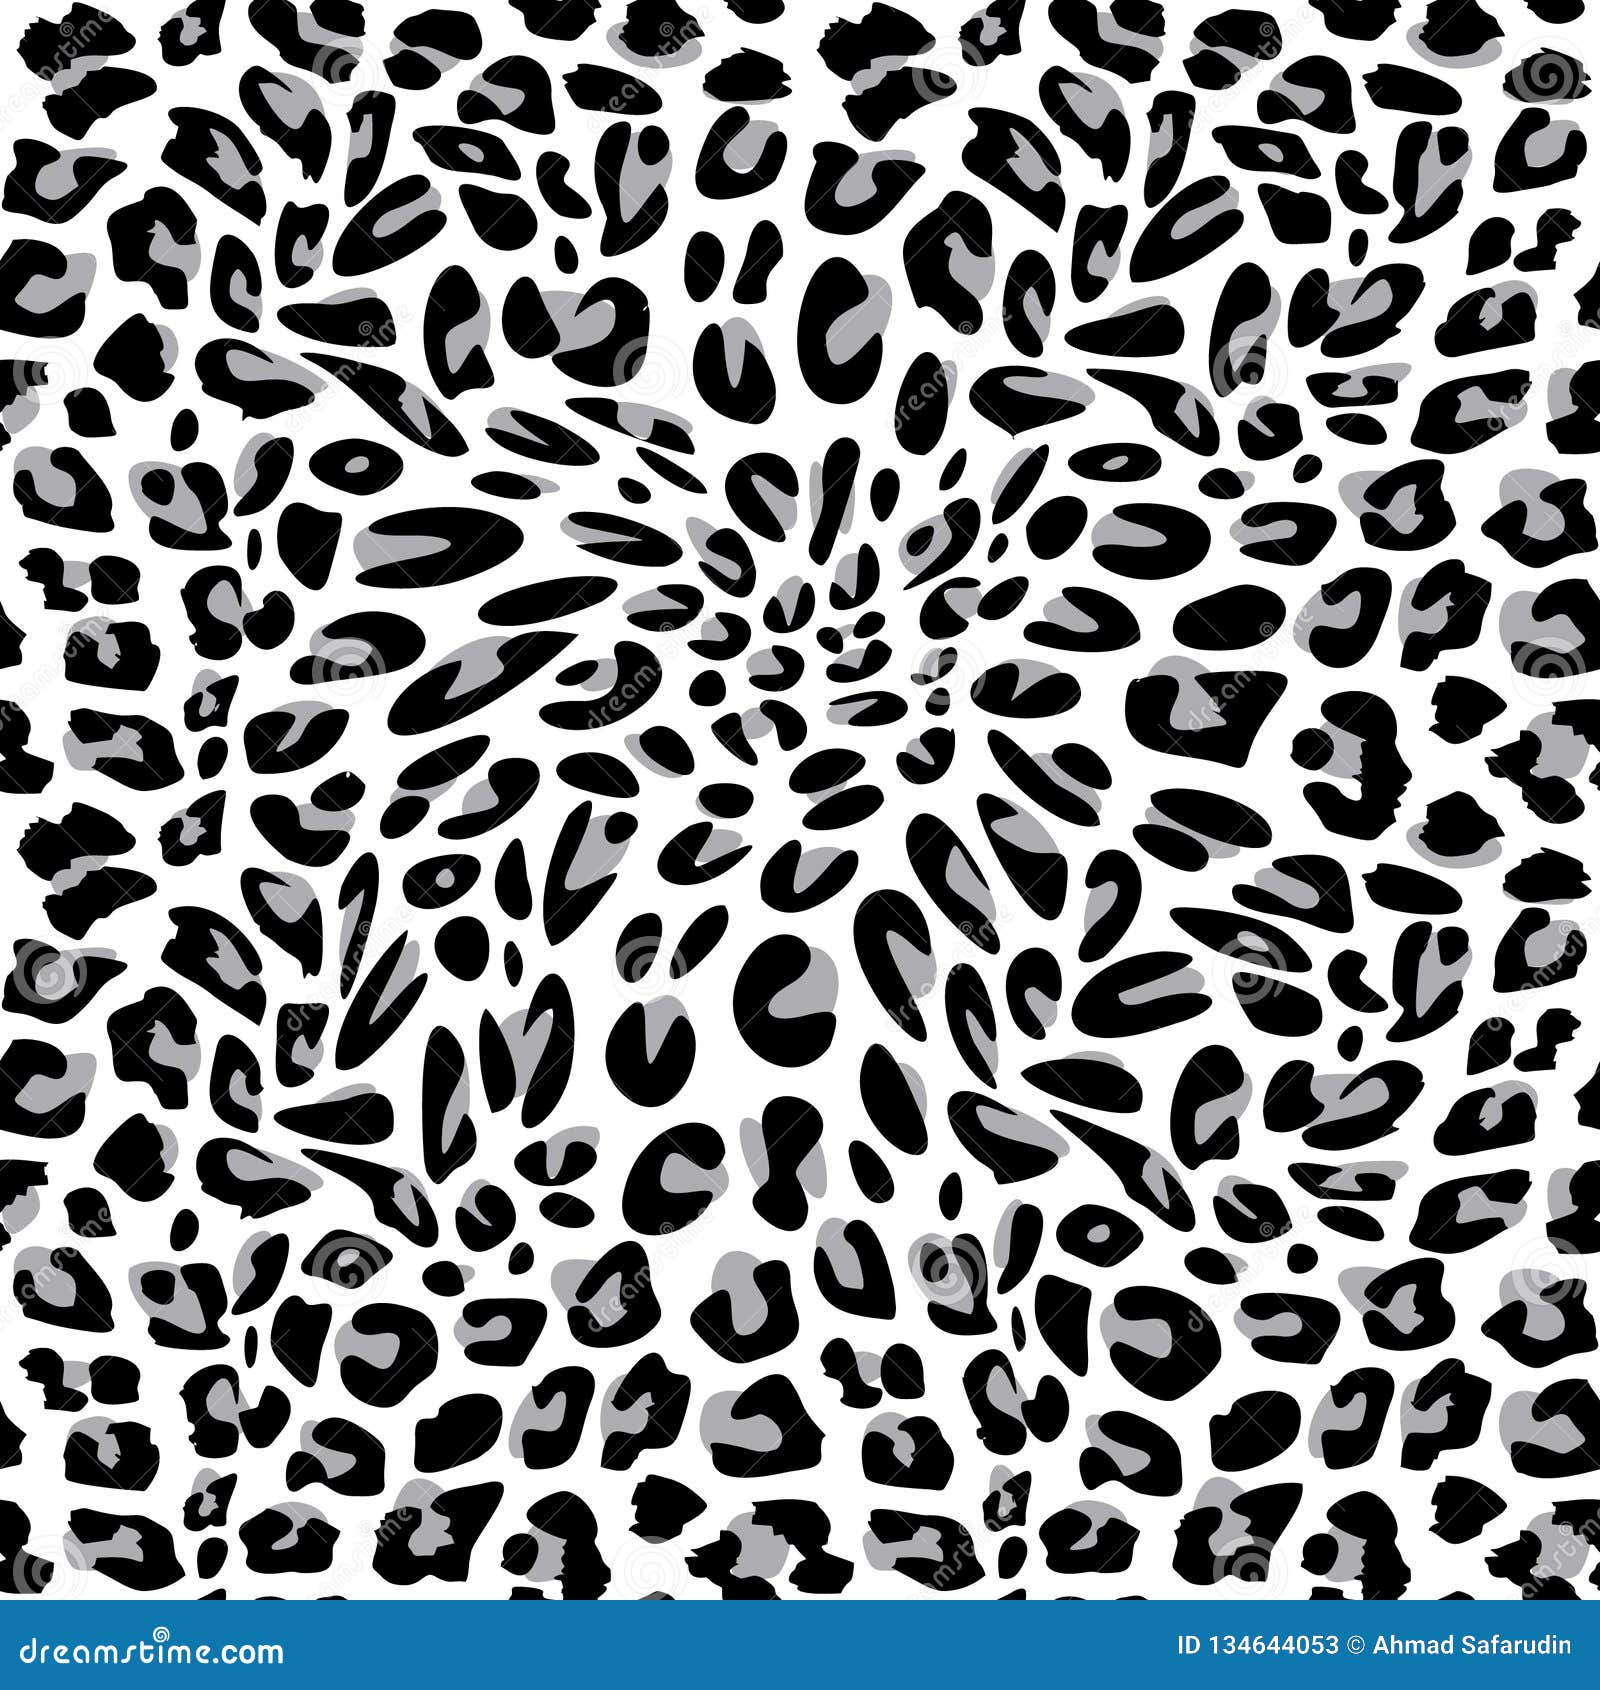 Leopard Seamless Pattern of Animal Skin in Black and White Stock Vector ...